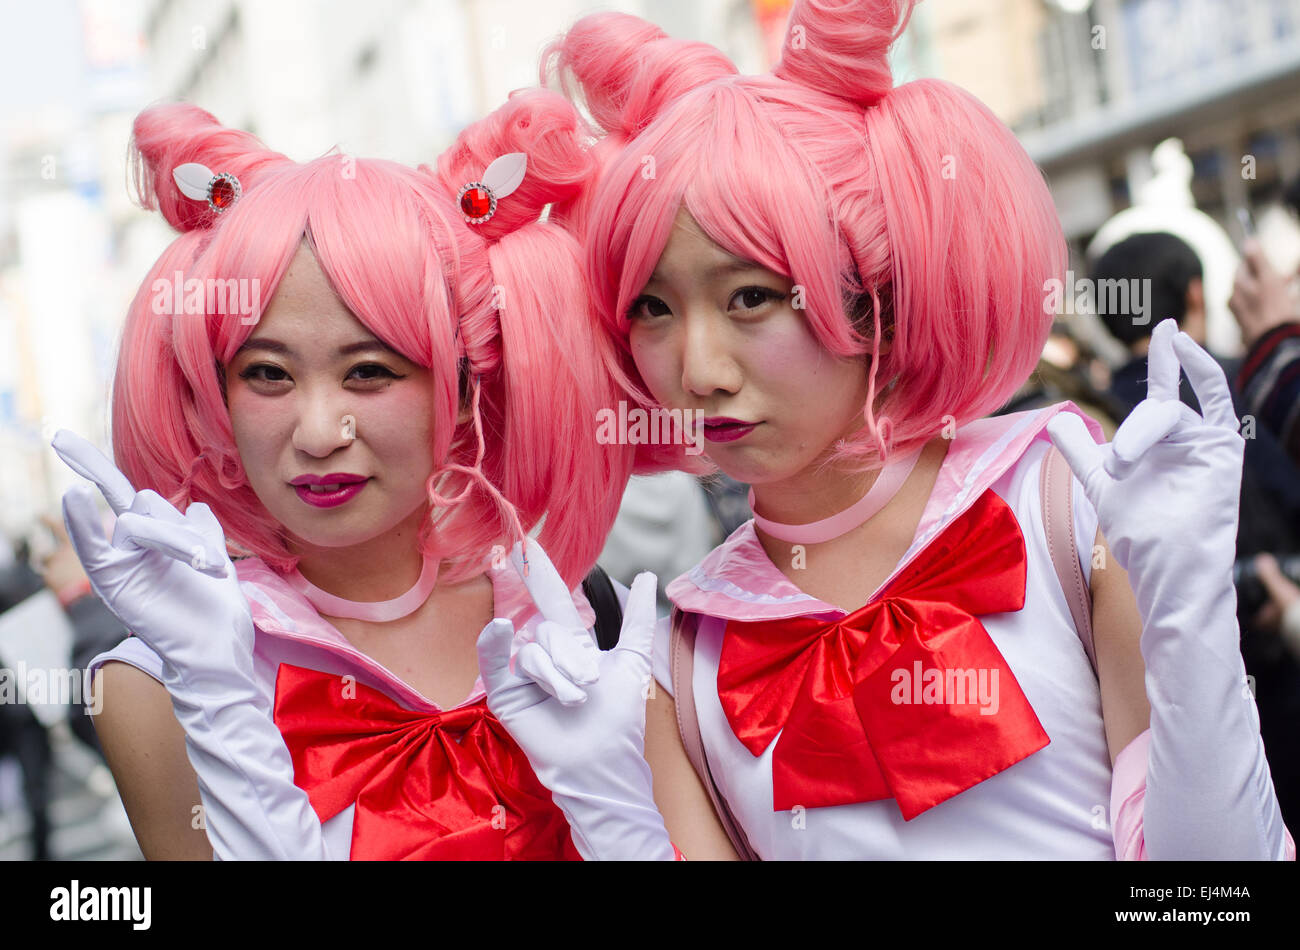 Thousands gather in the centre of Osaka, Japan in March 2015 for the annual Nipponbashi Street Festival. Stock Photo